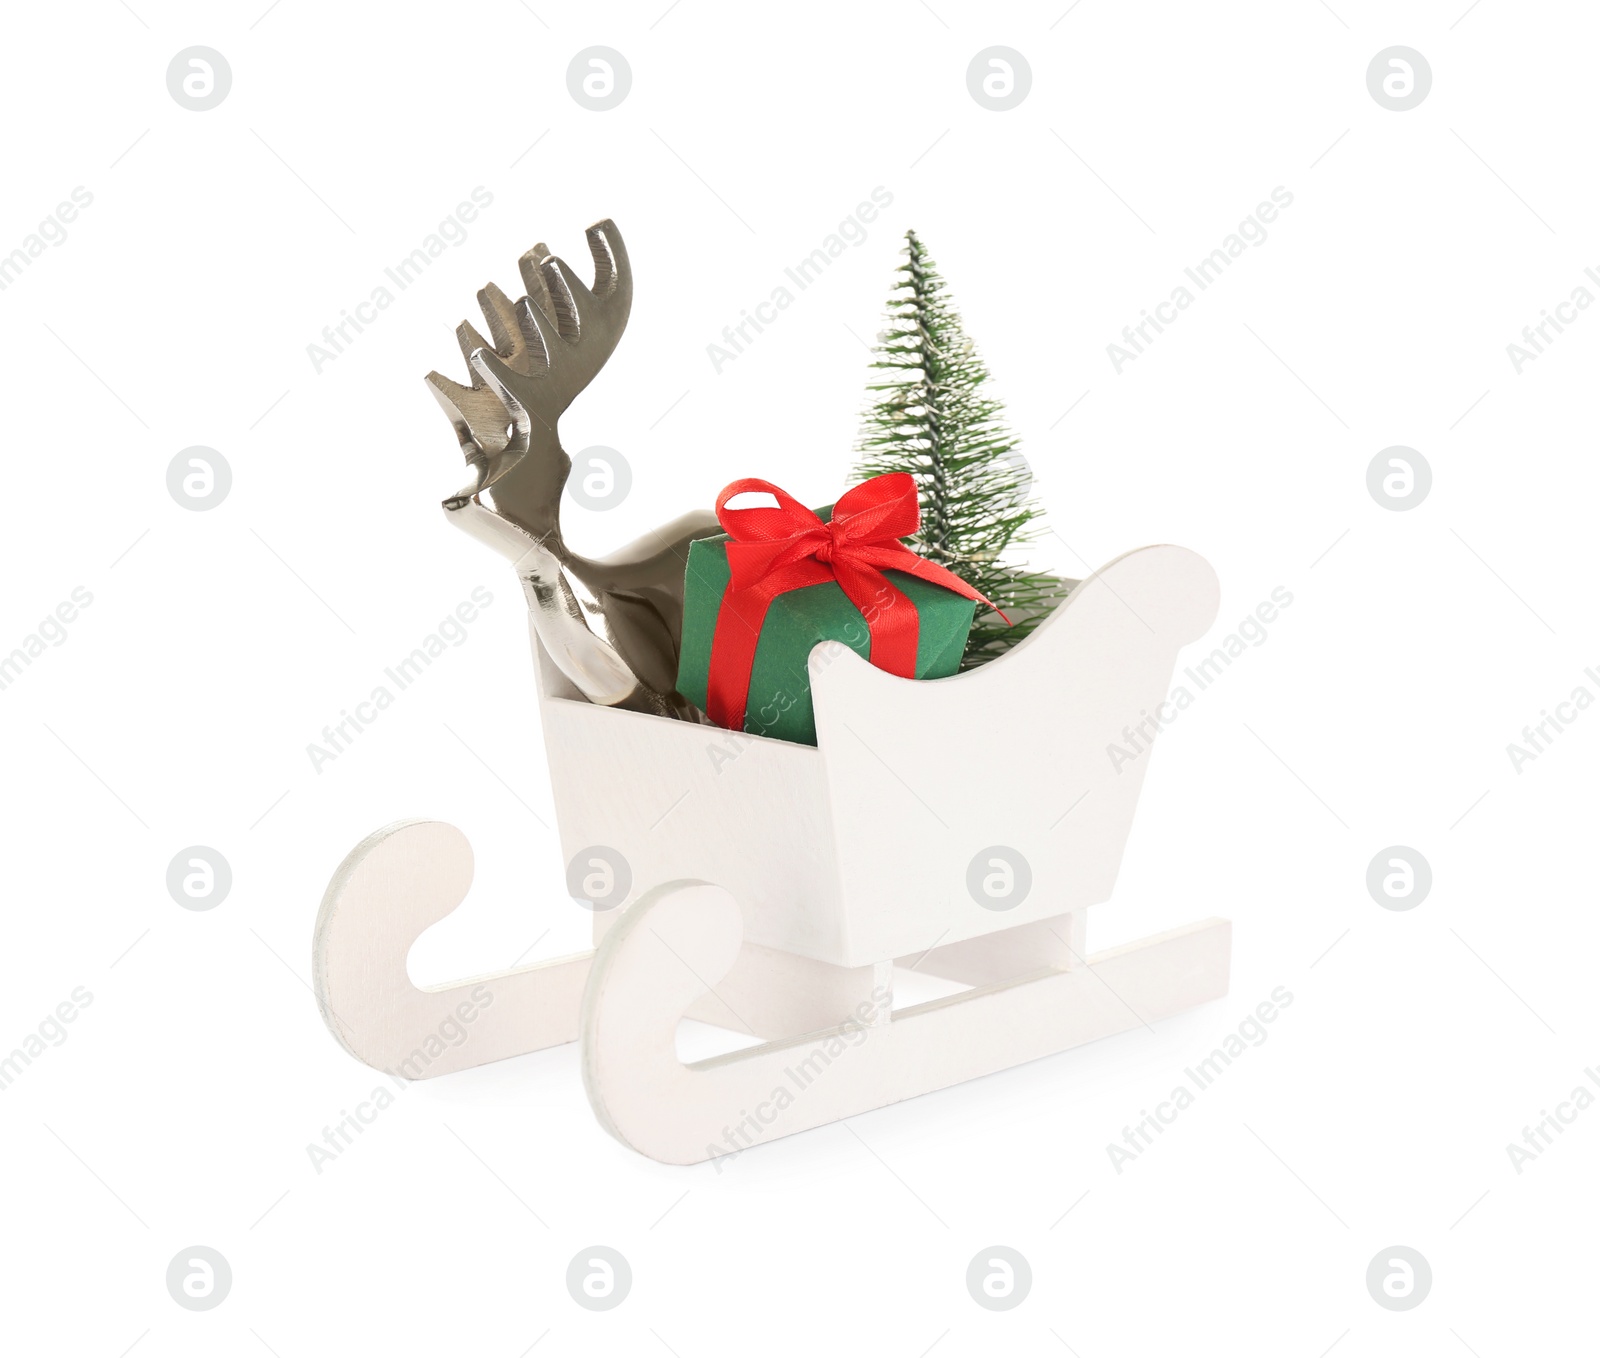 Photo of Wooden sleigh with present, decorative reindeer and fir tree on white background. Christmas holidays